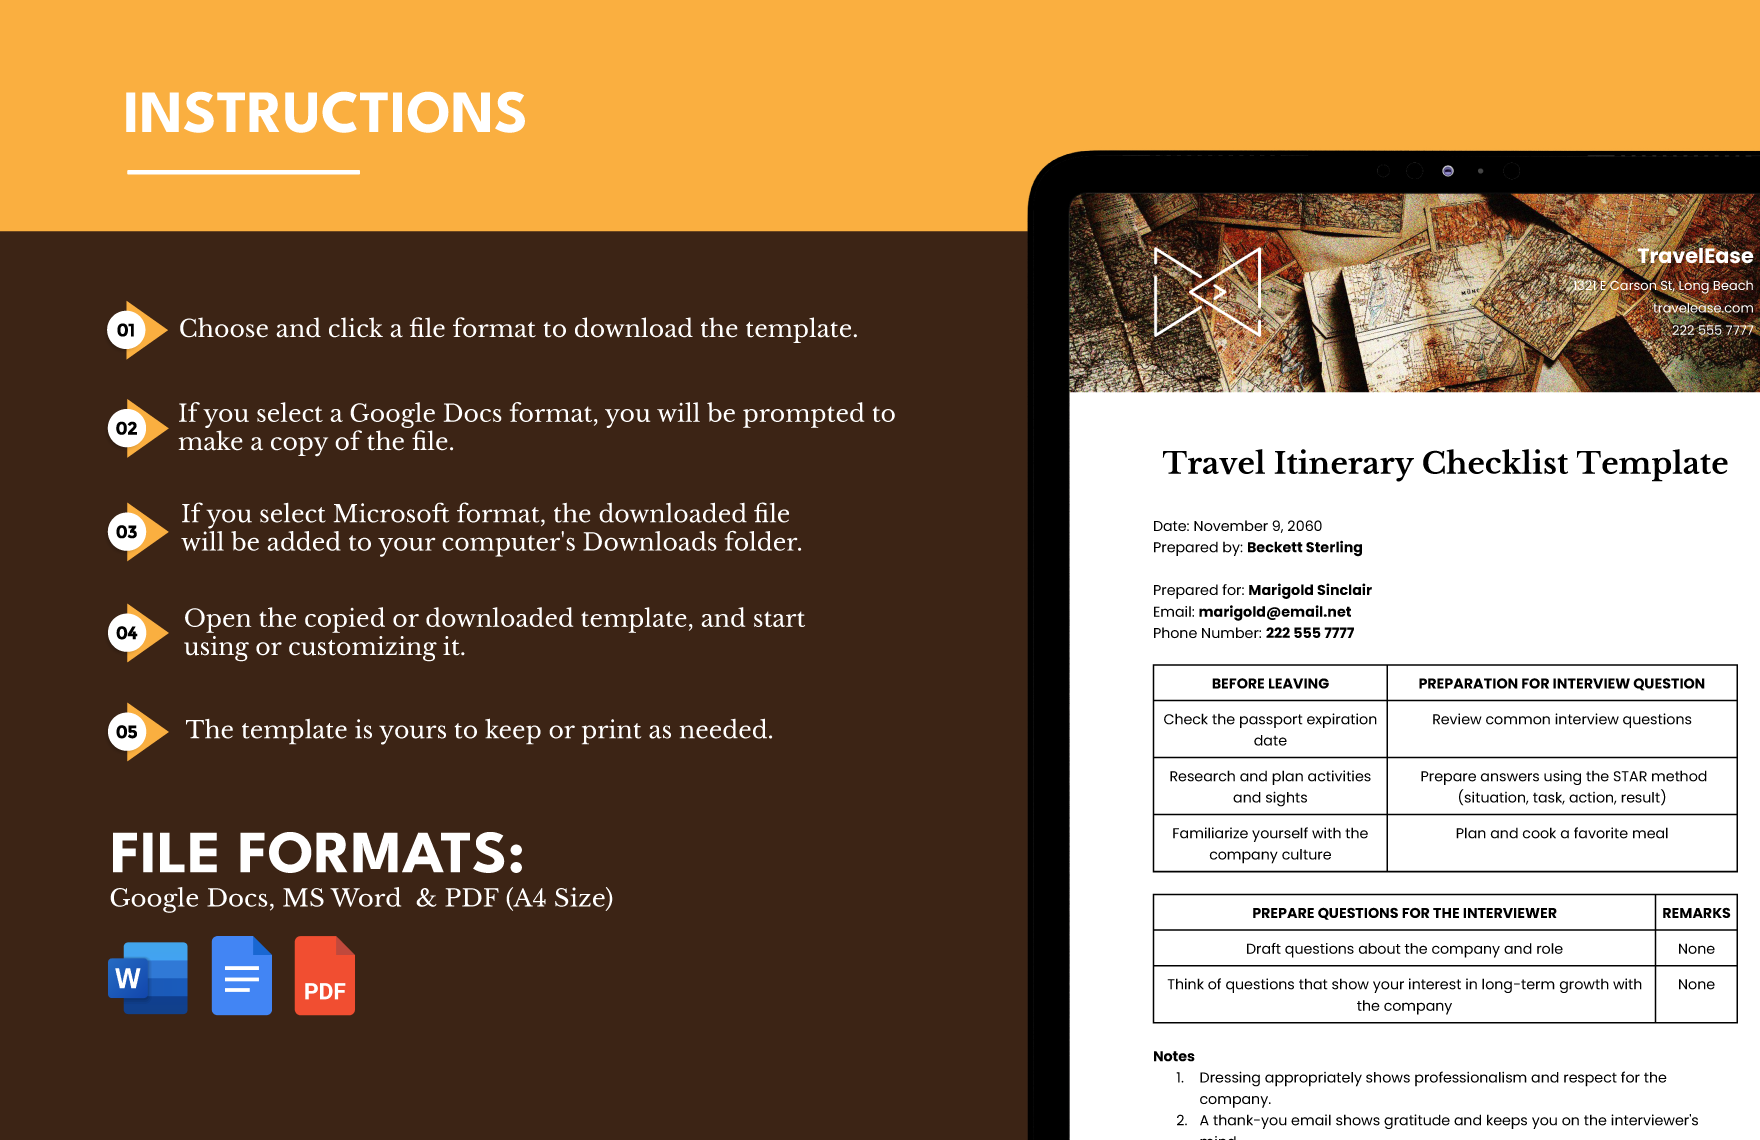 Travel Itinerary Checklist Template